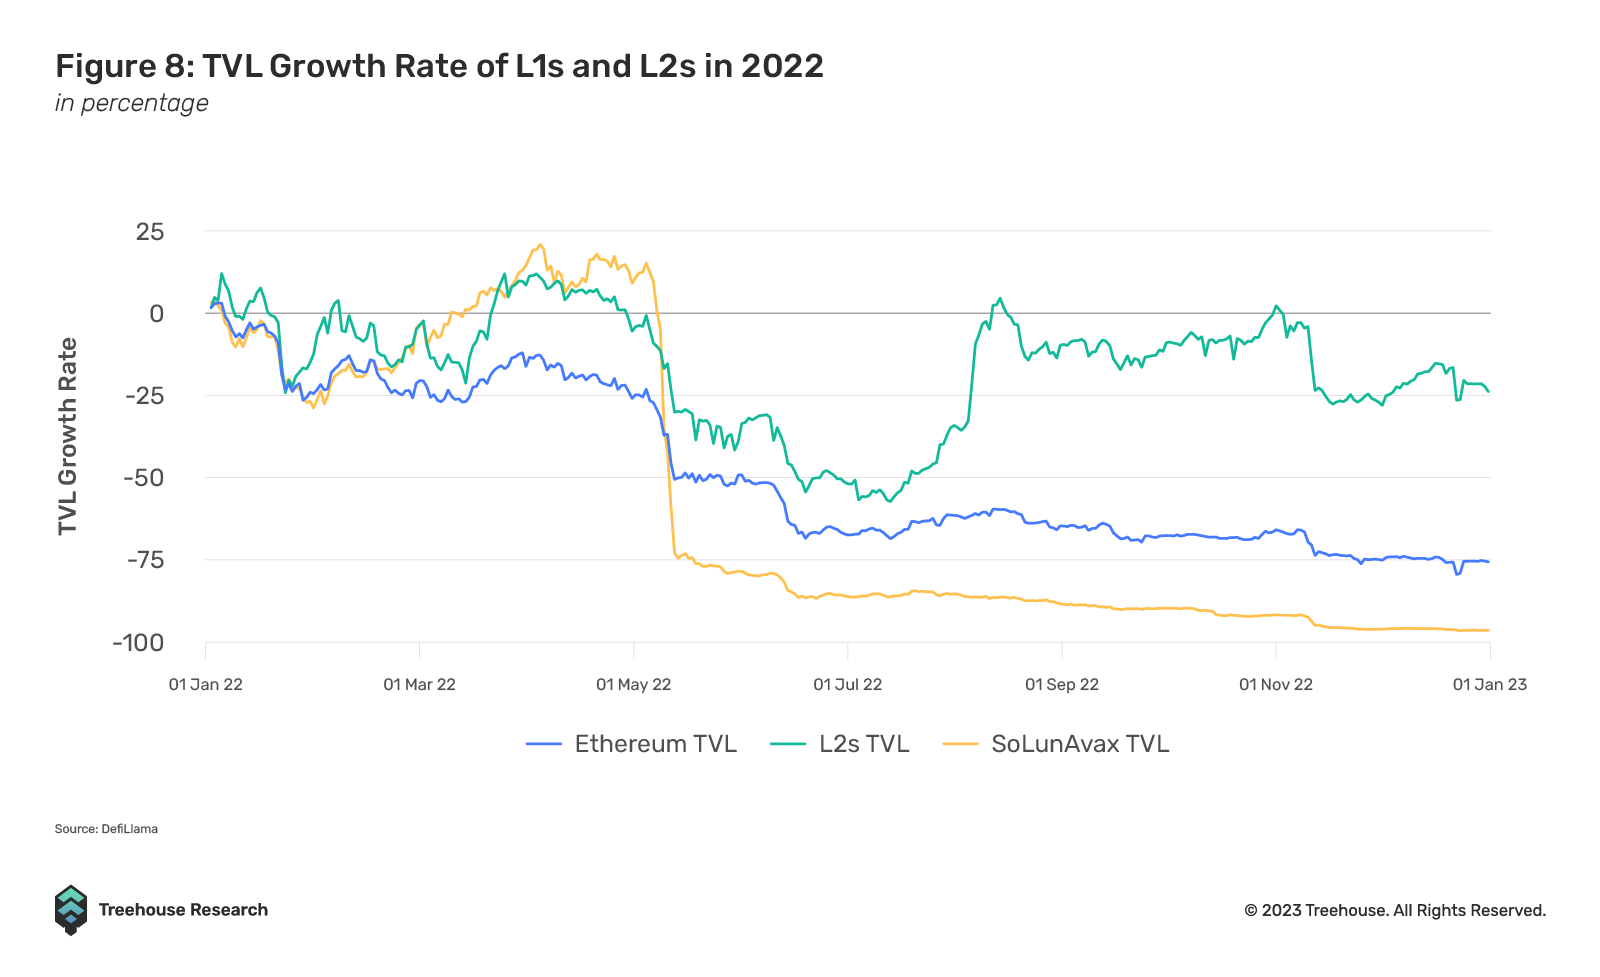 tvl growth of L1s and L2s